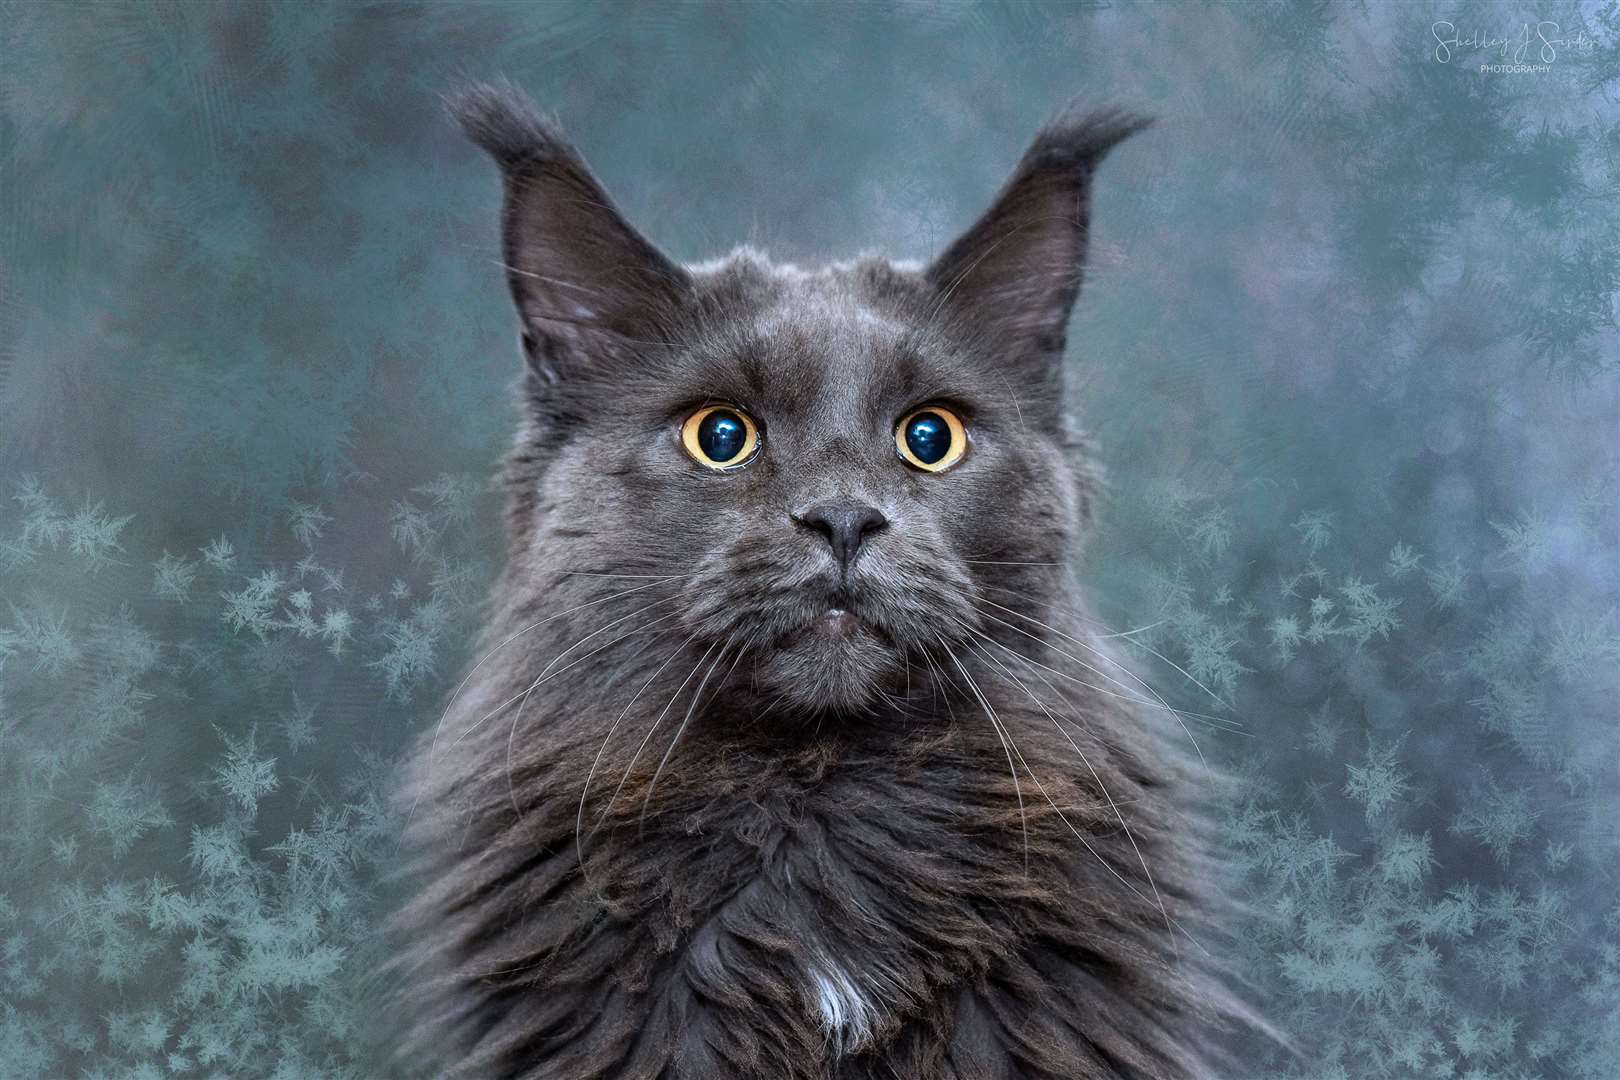 Flourence the Maine Coon Picture: Shelley Sinden Instagram: @fifi_themainecoon